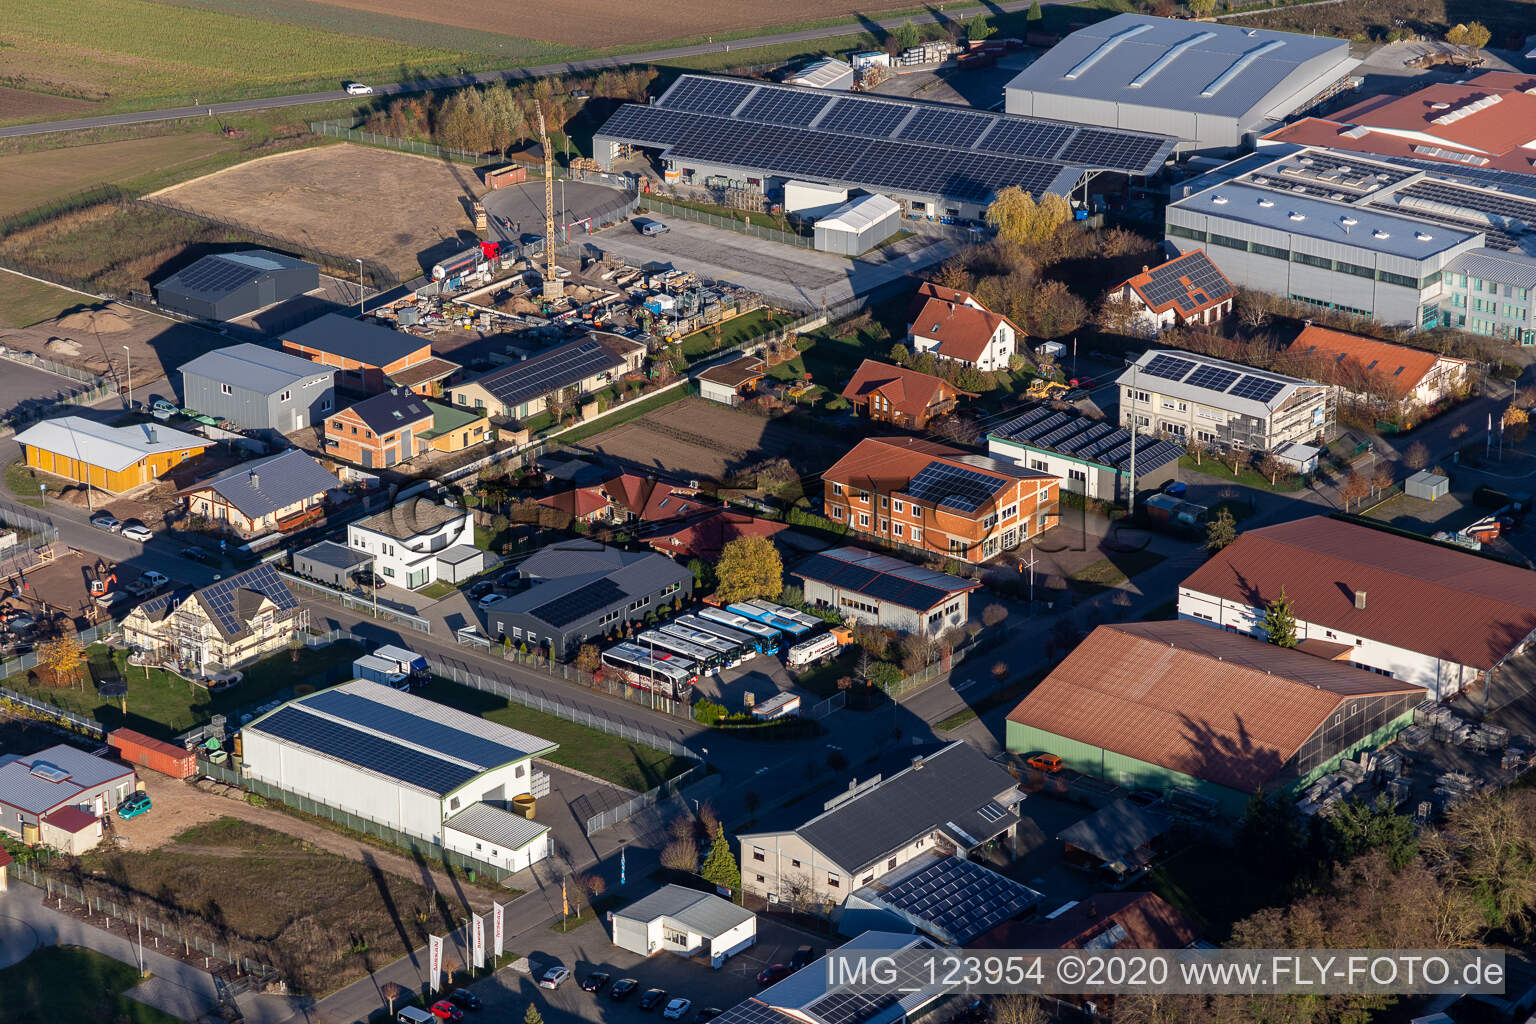 Oblique view of Commercial area in Gereut in Hatzenbühl in the state Rhineland-Palatinate, Germany